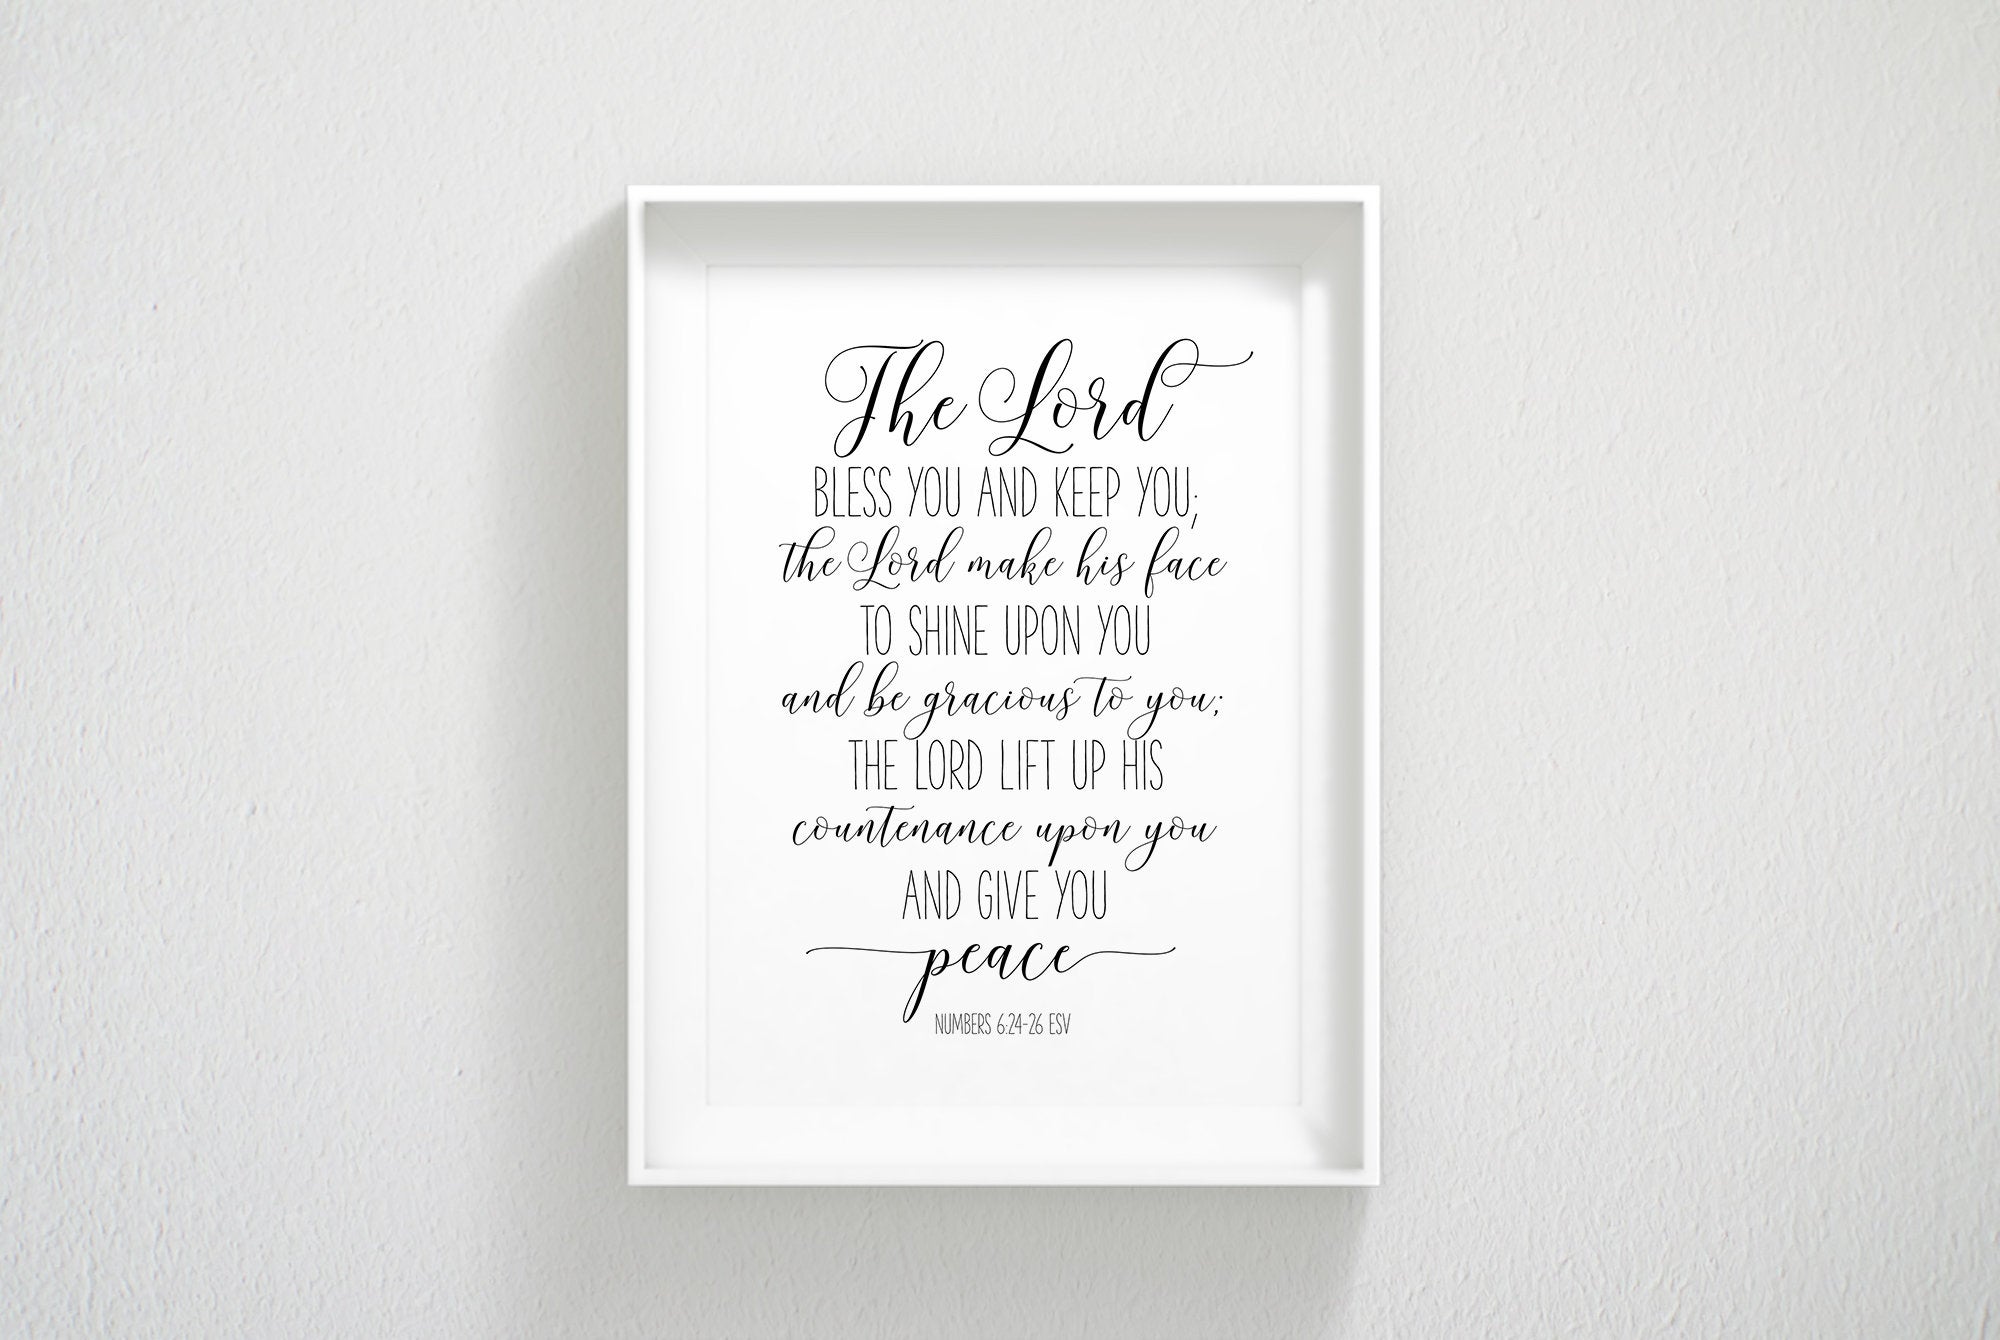 The Lord Bless You and Keep You, Number 6:24-26, Bible Verse Printable Wall Art, Nursery Quotes